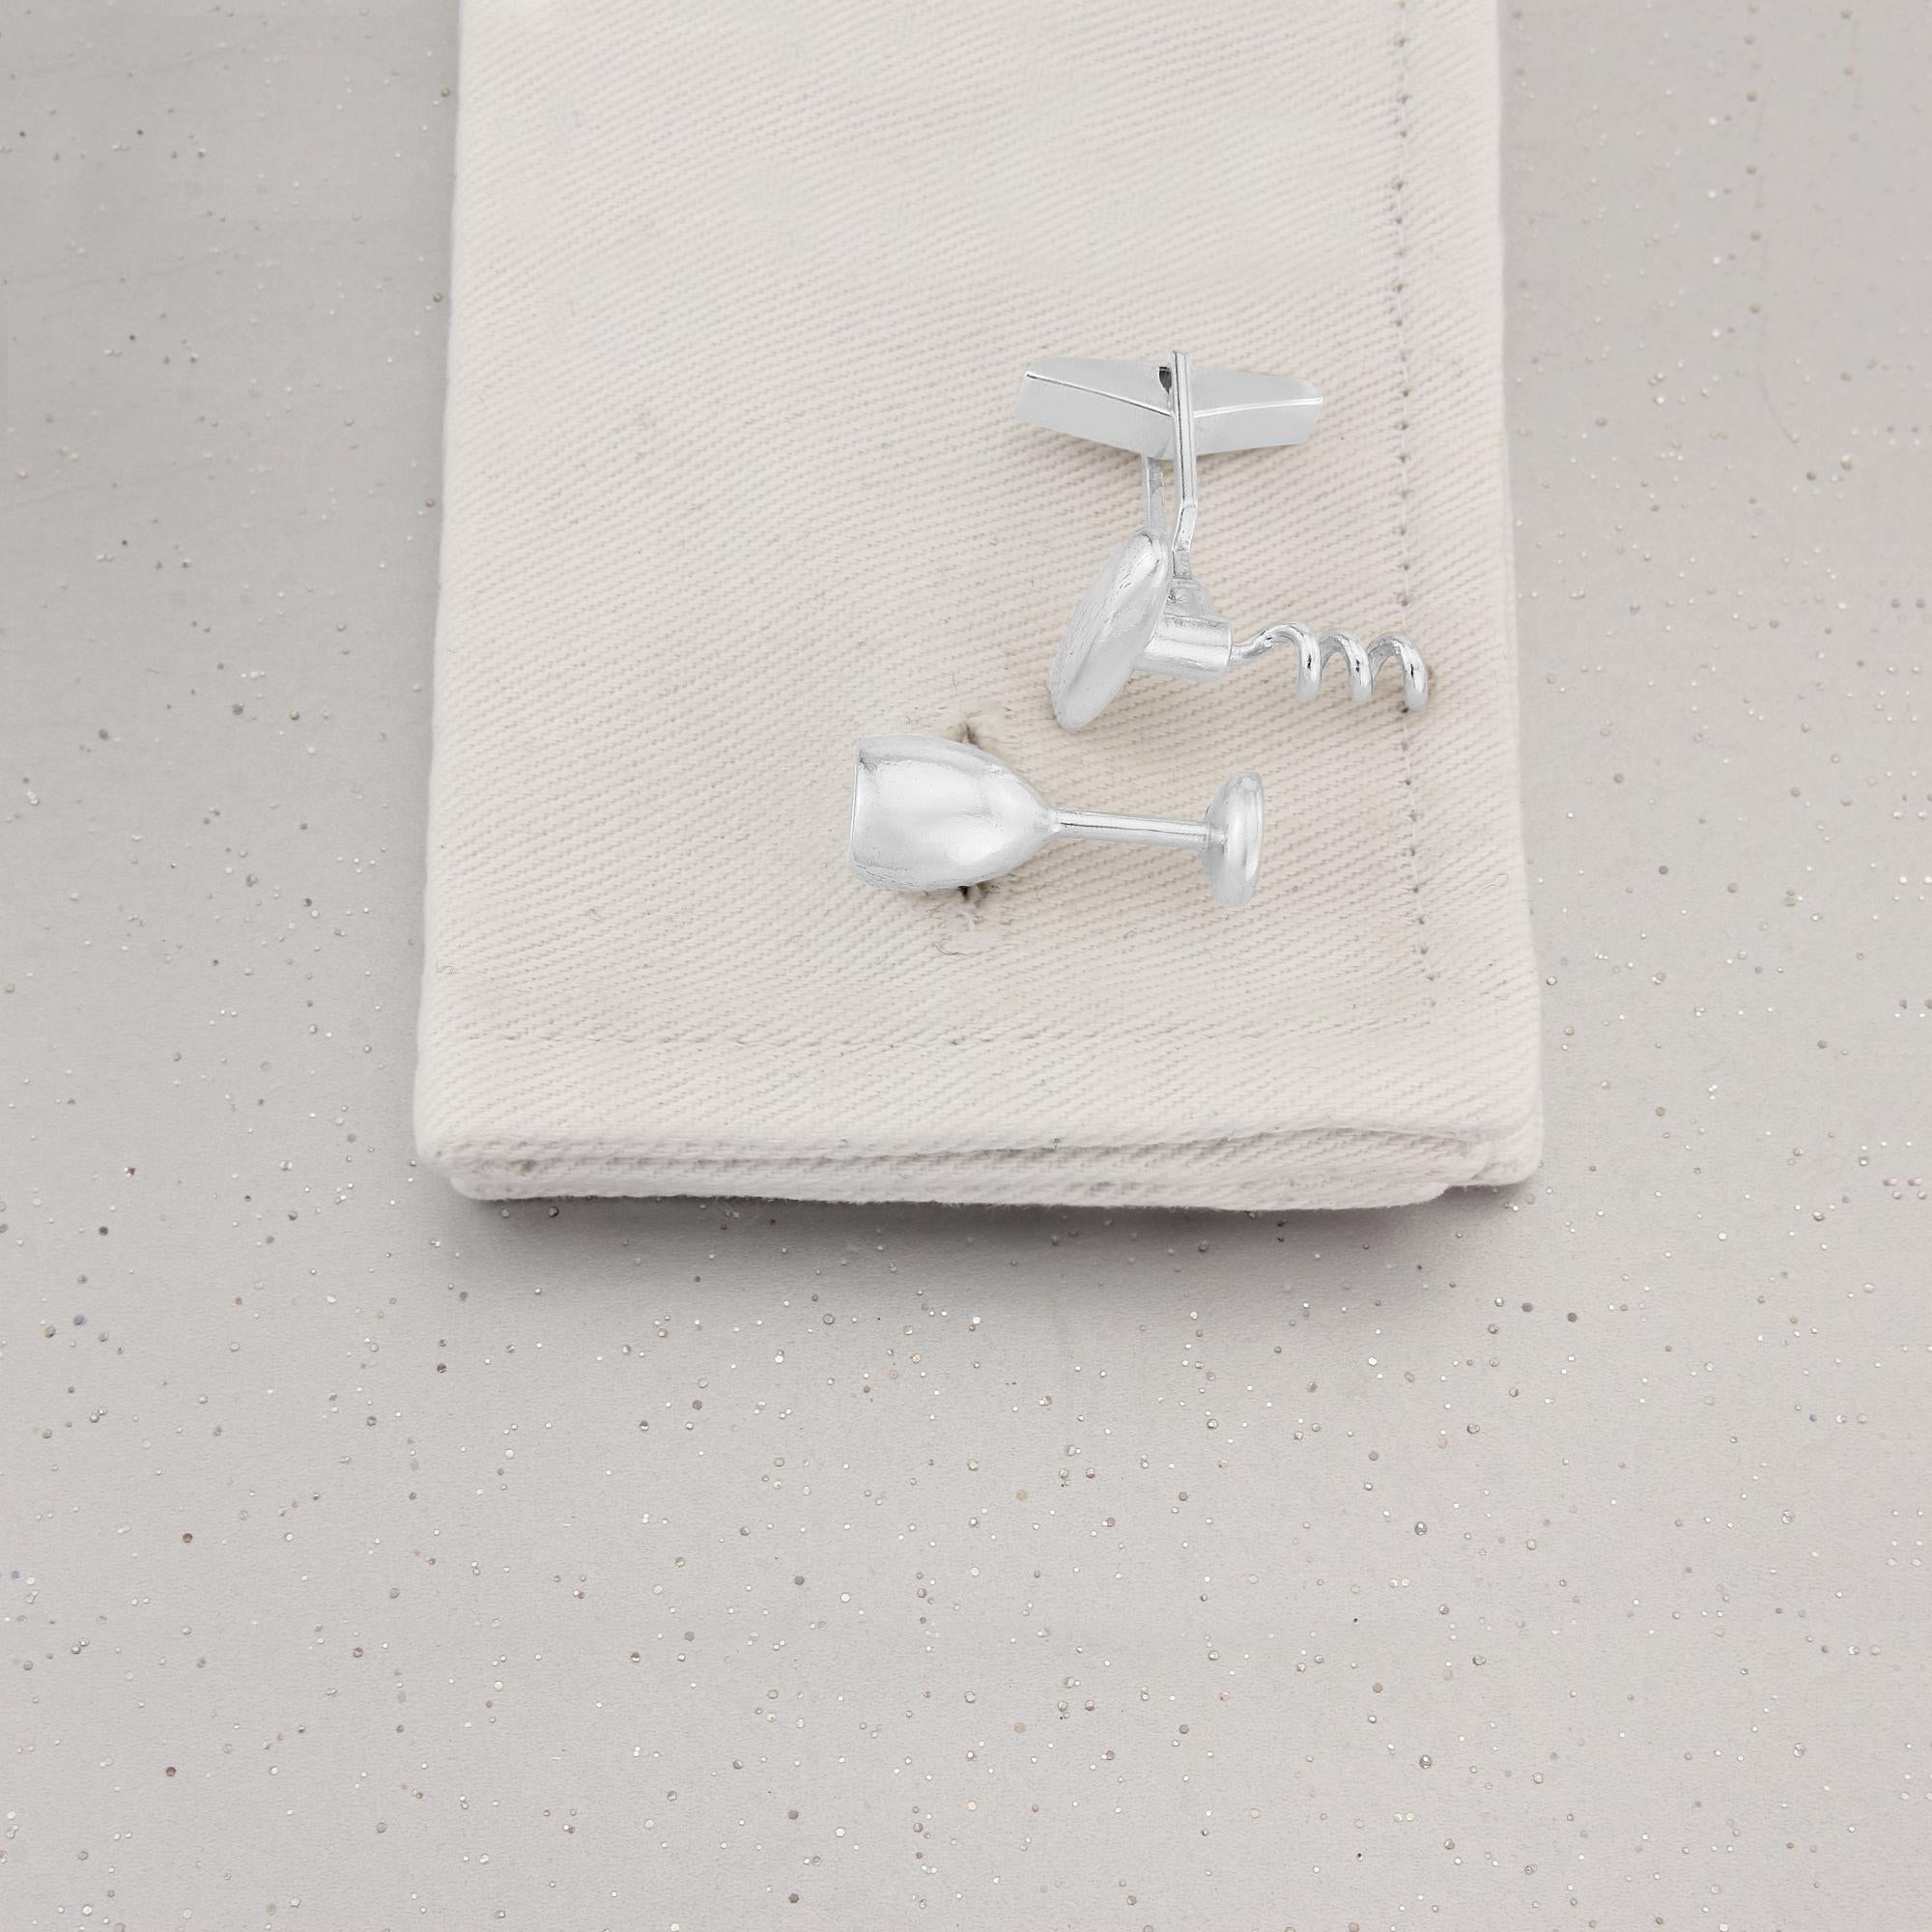 
These unusual wine glass and corkscrew cufflinks are made in solid Sterling Silver, using higher grade swivels for utmost quality.

This original design will not fail to delight the discerning, sophisticated gentleman with a penchant for a glass of